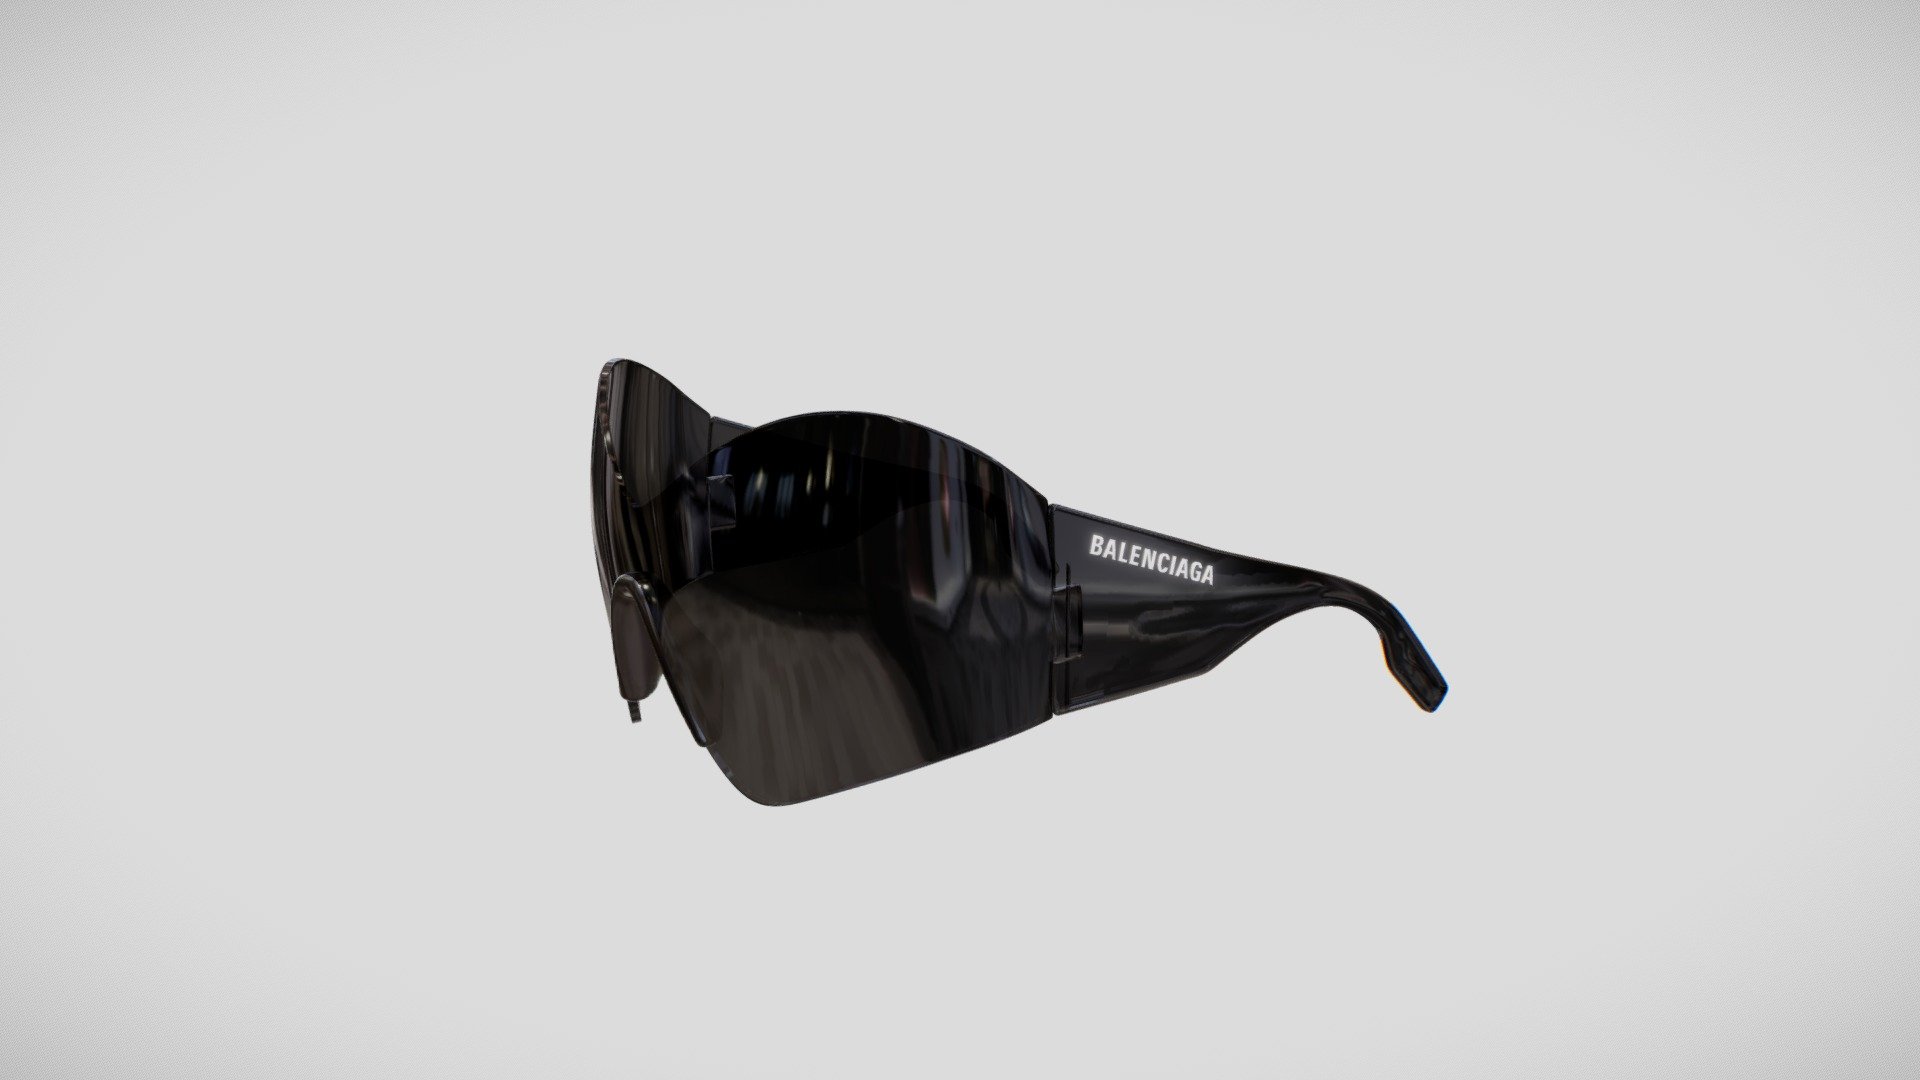 Introducing a stunning high poly 3D model of Balenciaga sunglasses! This meticulously crafted digital replica captures the essence of the iconic eyewear with remarkable detail and precision. From the sleek and contemporary frame design to the exquisite texture and finishes, every element has been faithfully recreated to showcase the sunglasses' sophisticated style. Whether you're a fashion enthusiast, a 3D artist, or simply appreciate exceptional craftsmanship, this Balenciaga sunglasses model is sure to captivate and elevate your visual experience 3d model